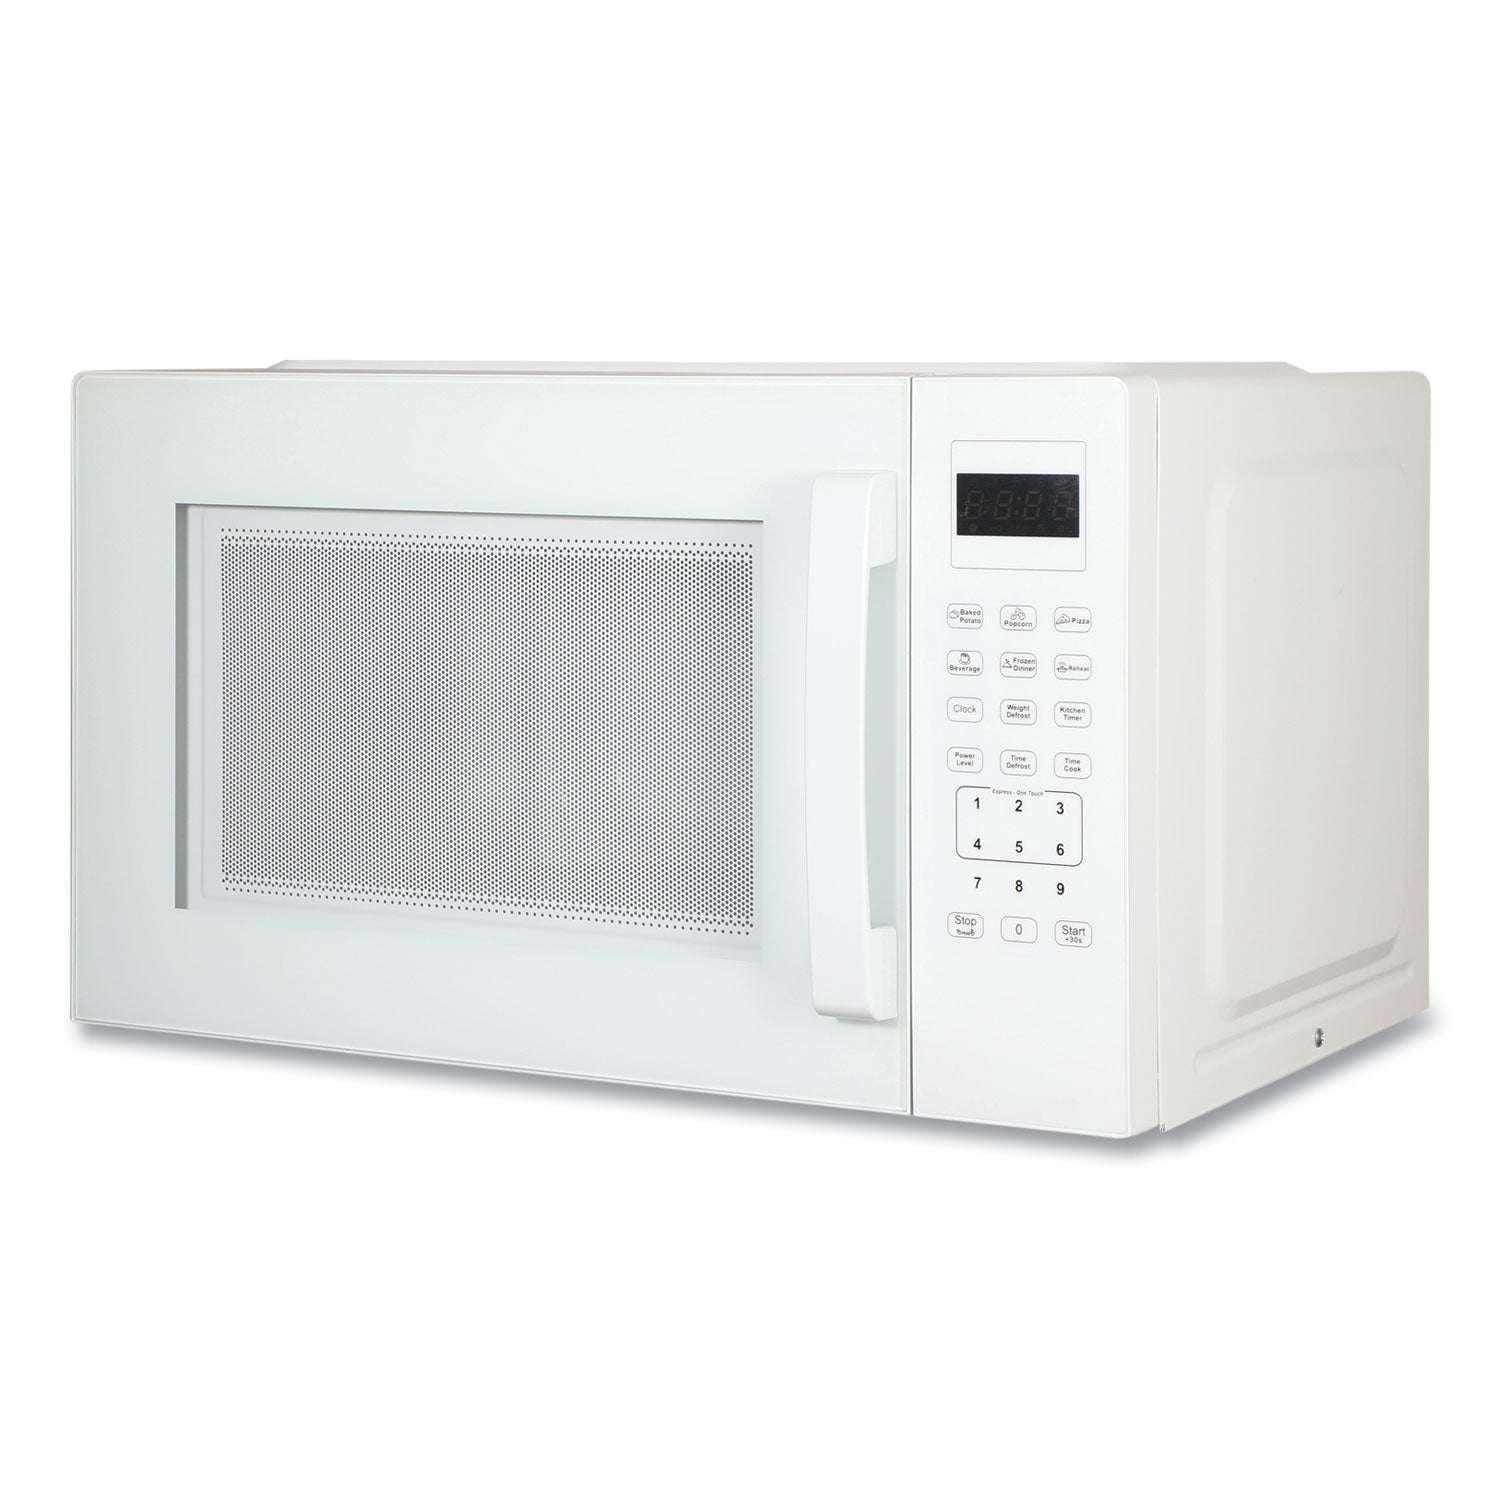 15-cu-ft-microwave-oven-1000-w-white_avamt150v0w - 1